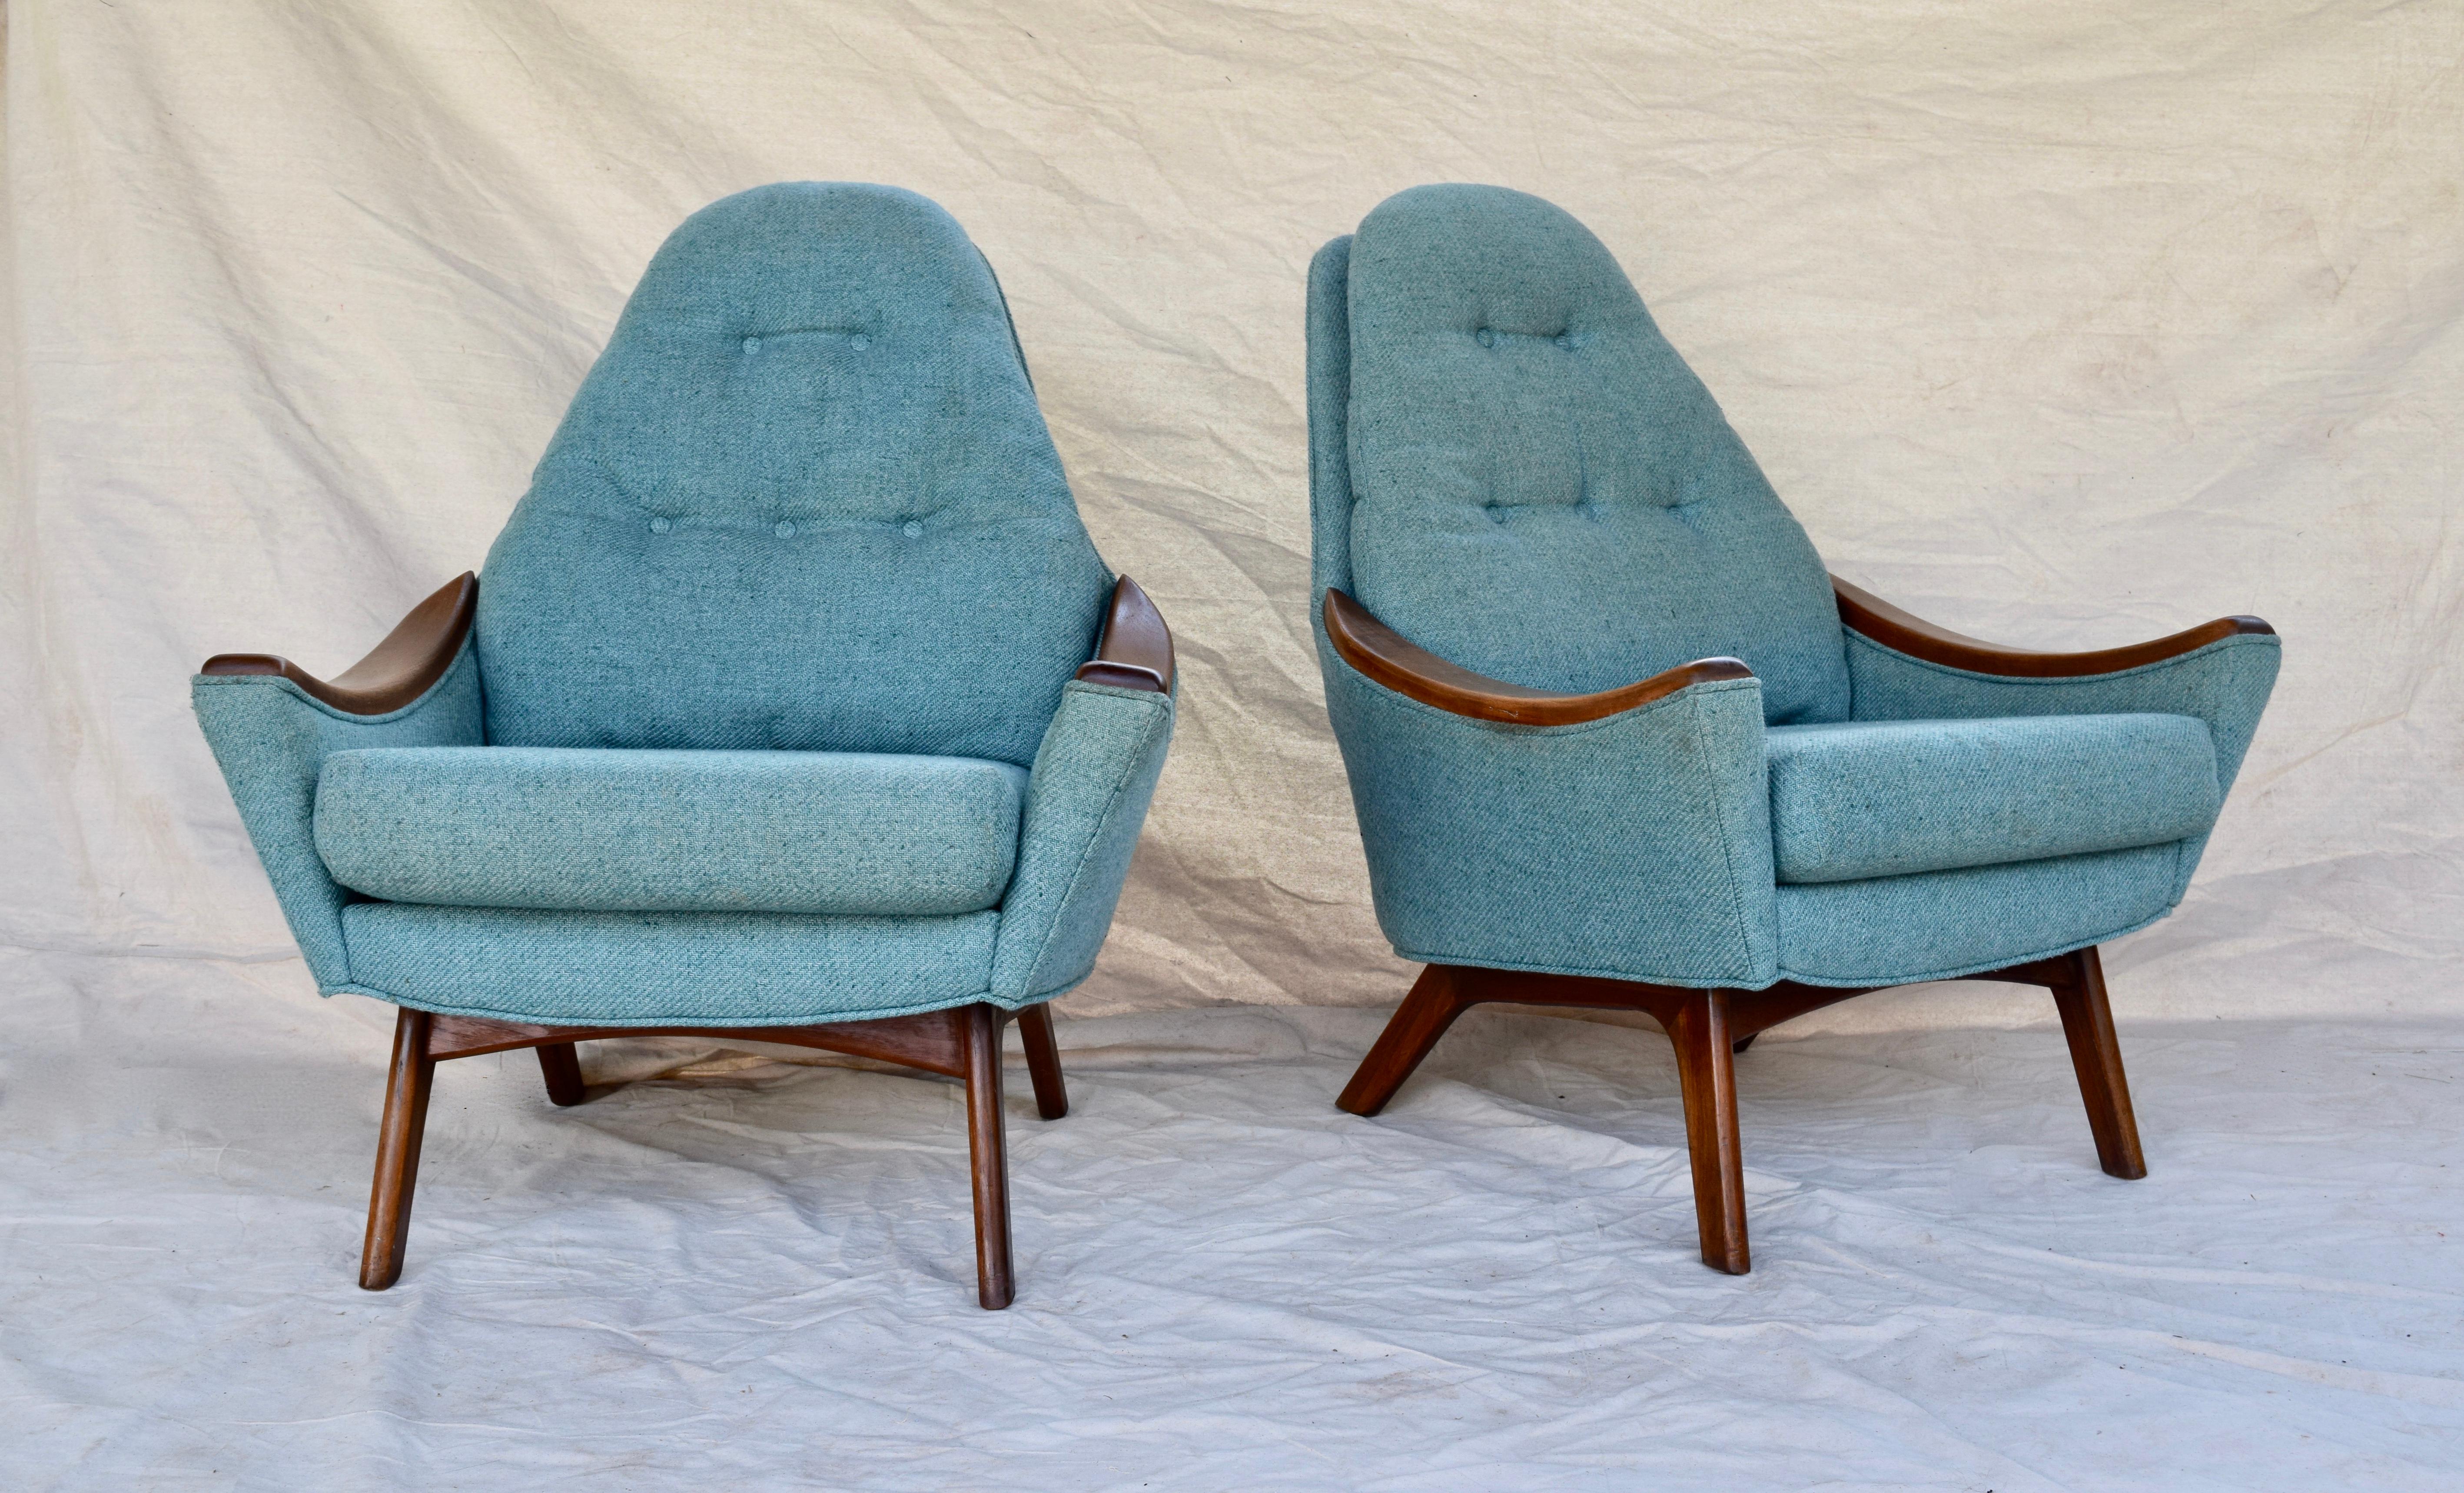 Vintage modern pair of Adrian Pearsall for Craft Associates lounge chairs with sculptural walnut swag arms and base. Solid structure with original teal upholstery in well maintained vintage condition.